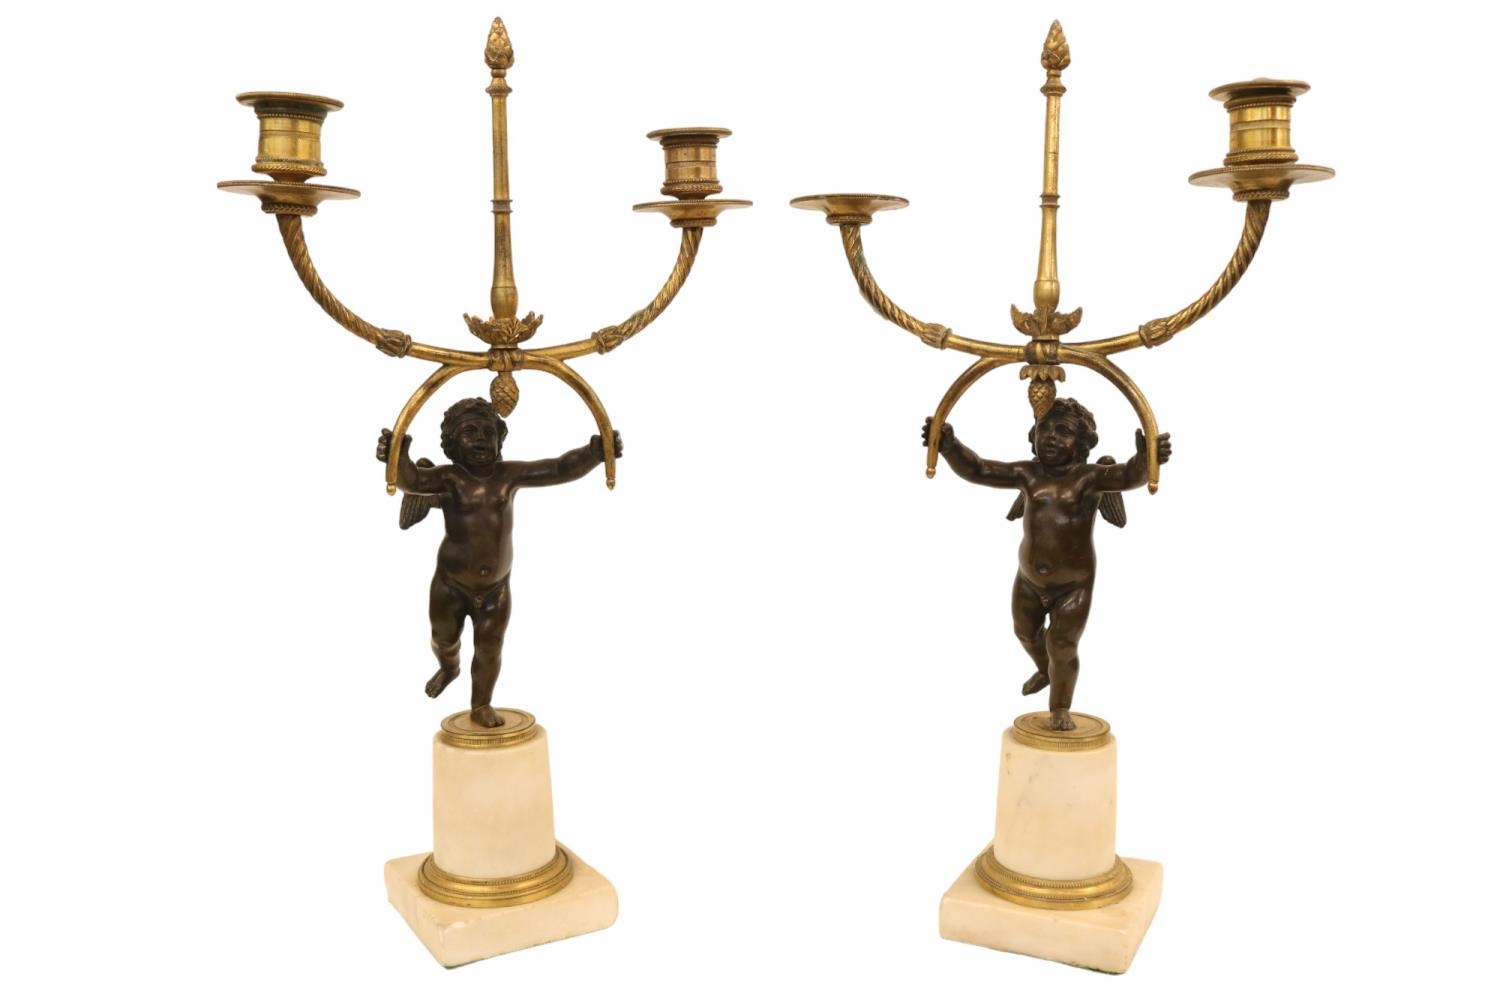 A Pair of Marble and Ormolu Mounted Two Branch Candelabra Mid 19thC modelled as Bronze Putti